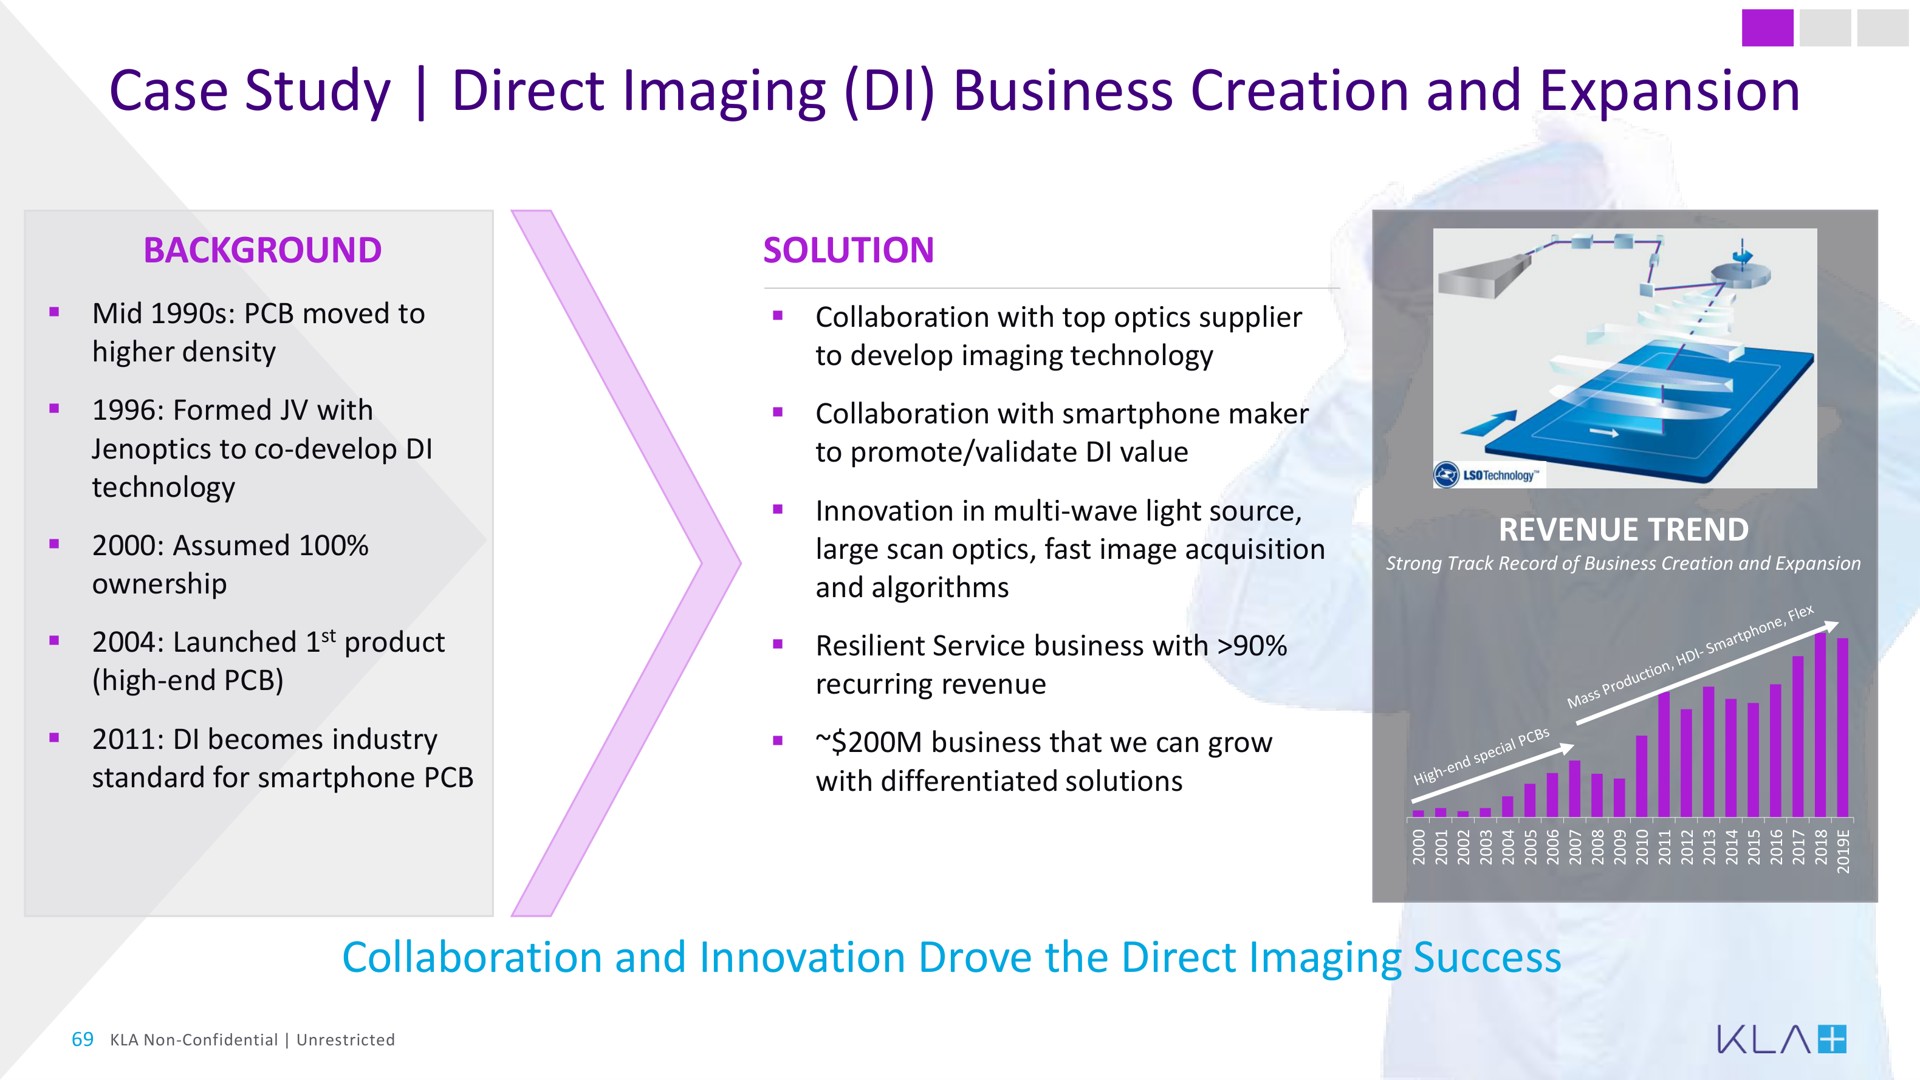 case study direct imaging business creation and expansion | KLA